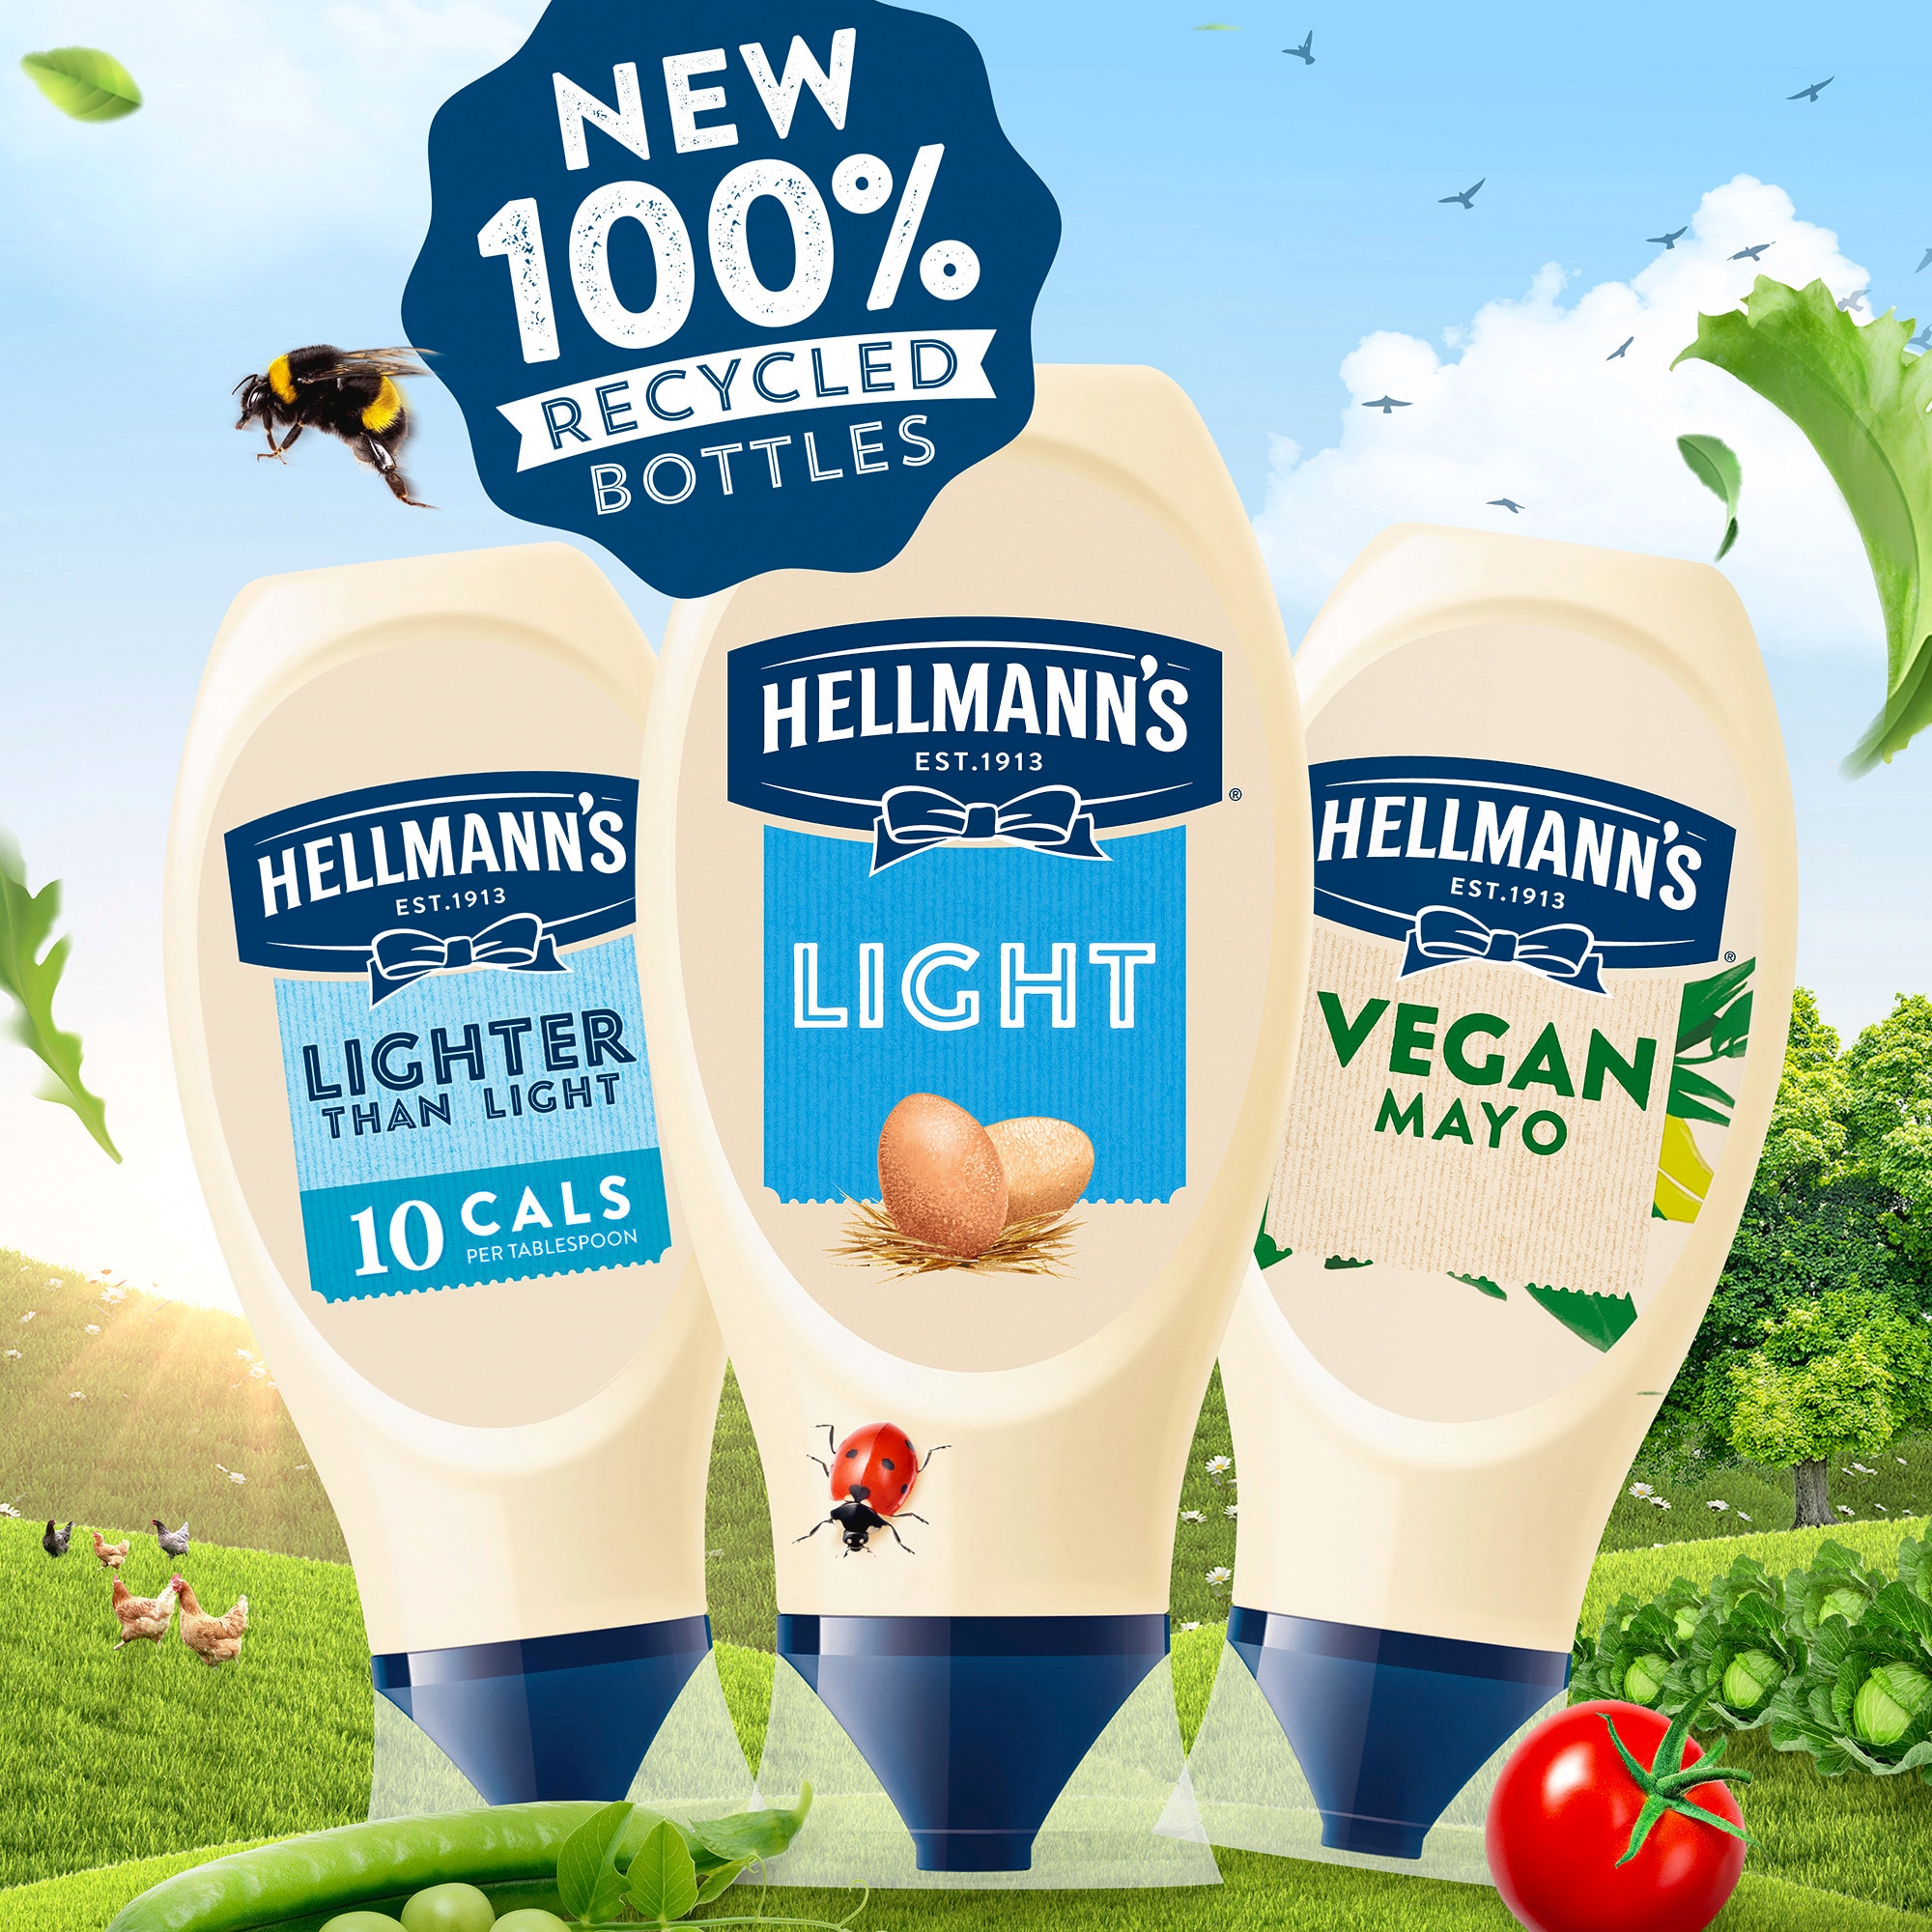 Hellmann's New 100% Recycled Bottles